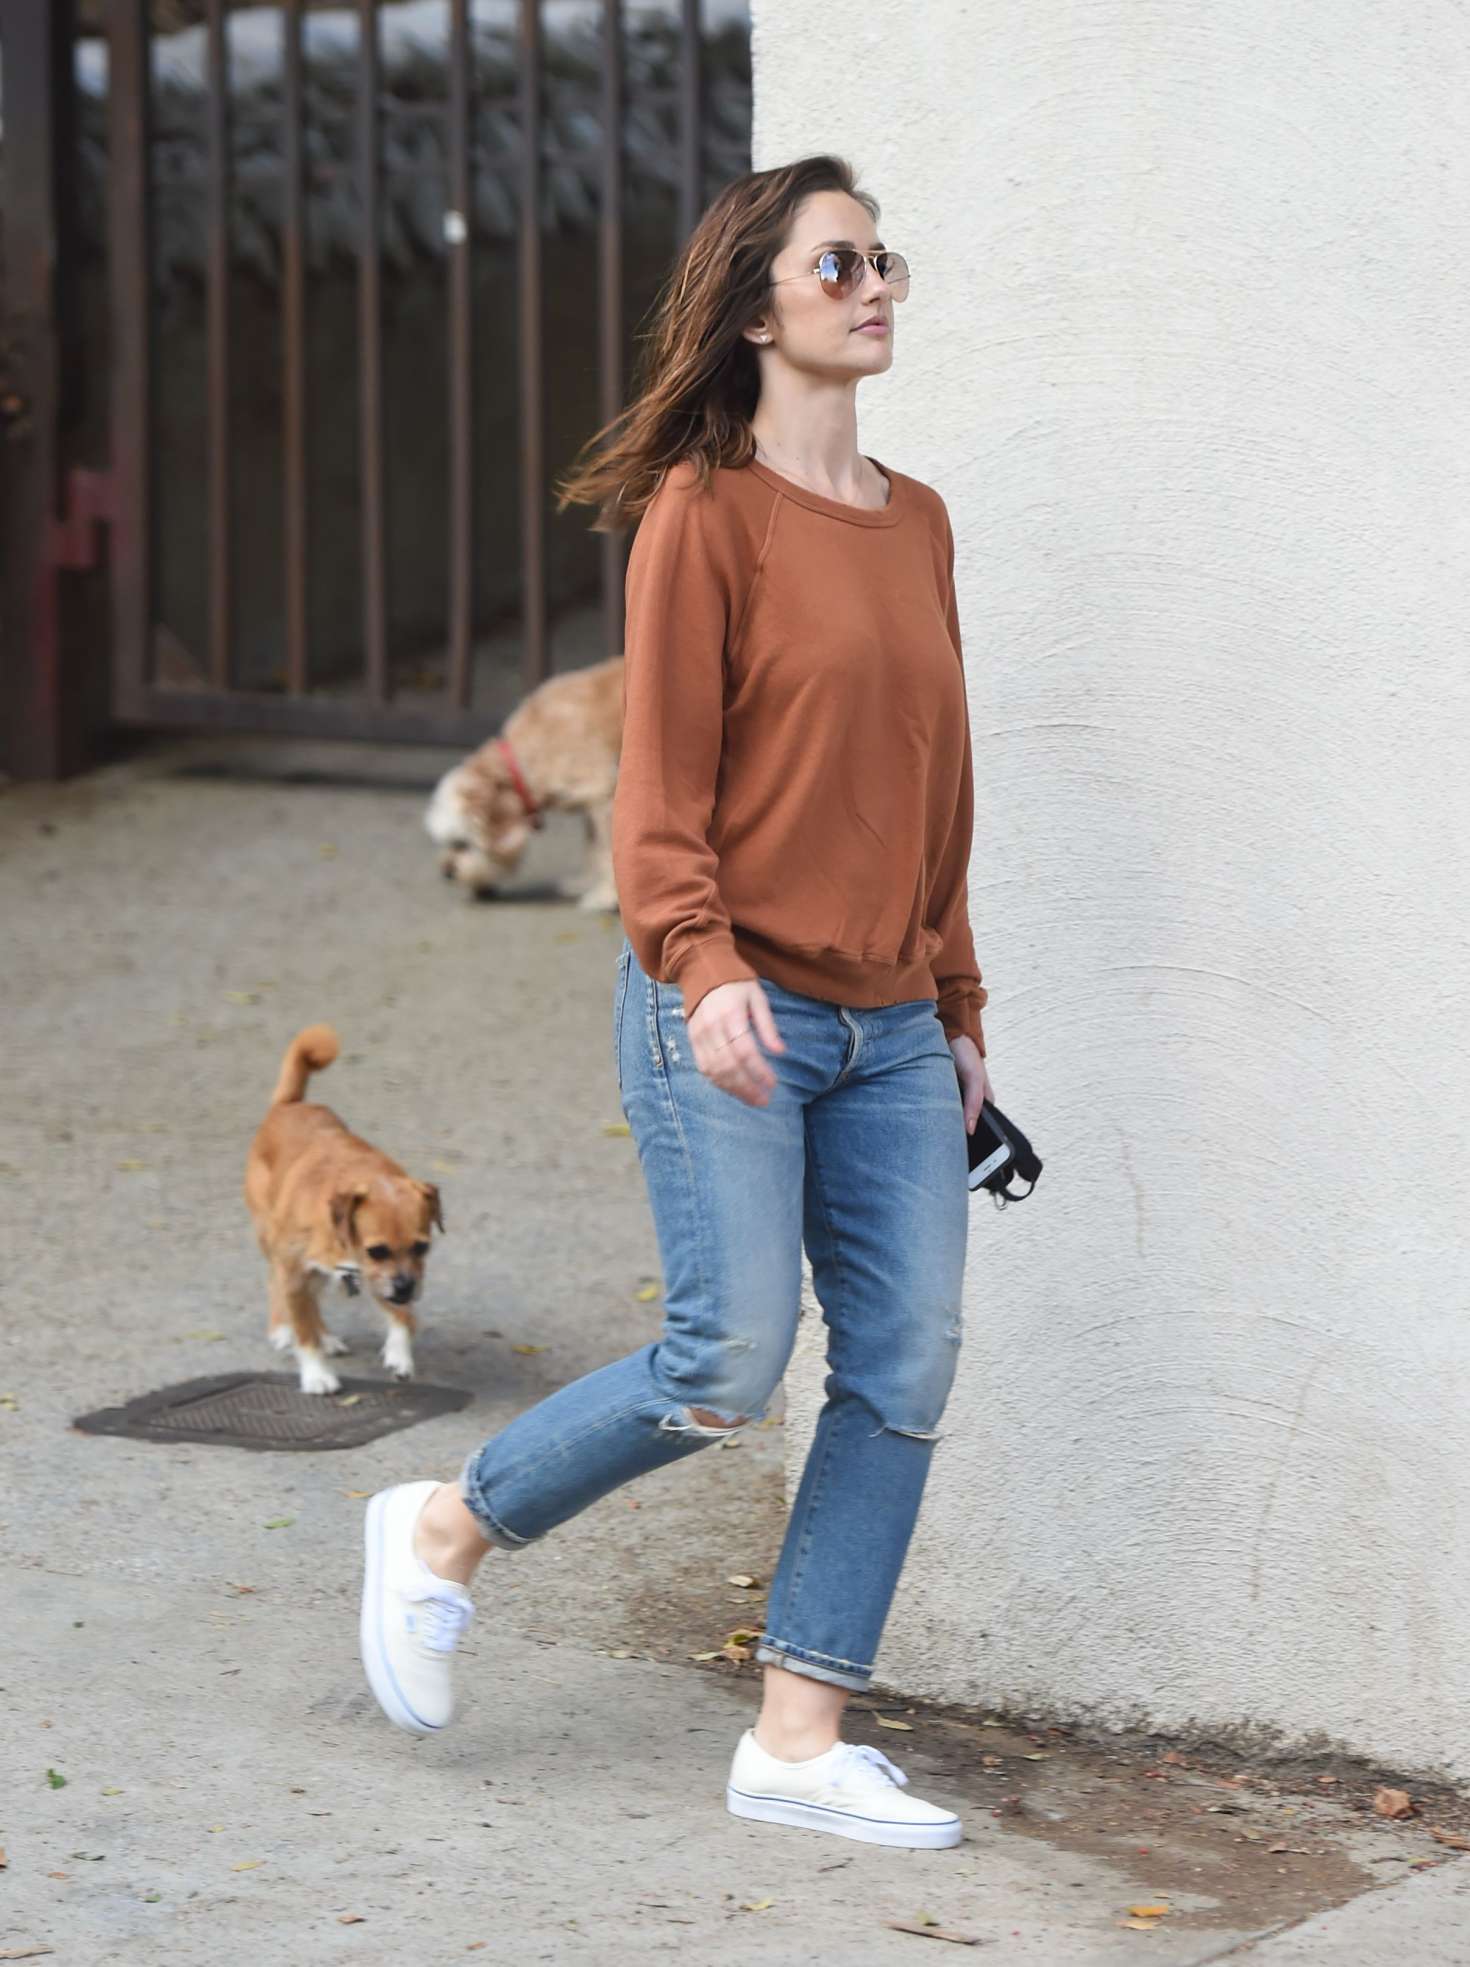 Minka Kelly 2017 : Minka Kelly with her dogs out in Hollywood -05